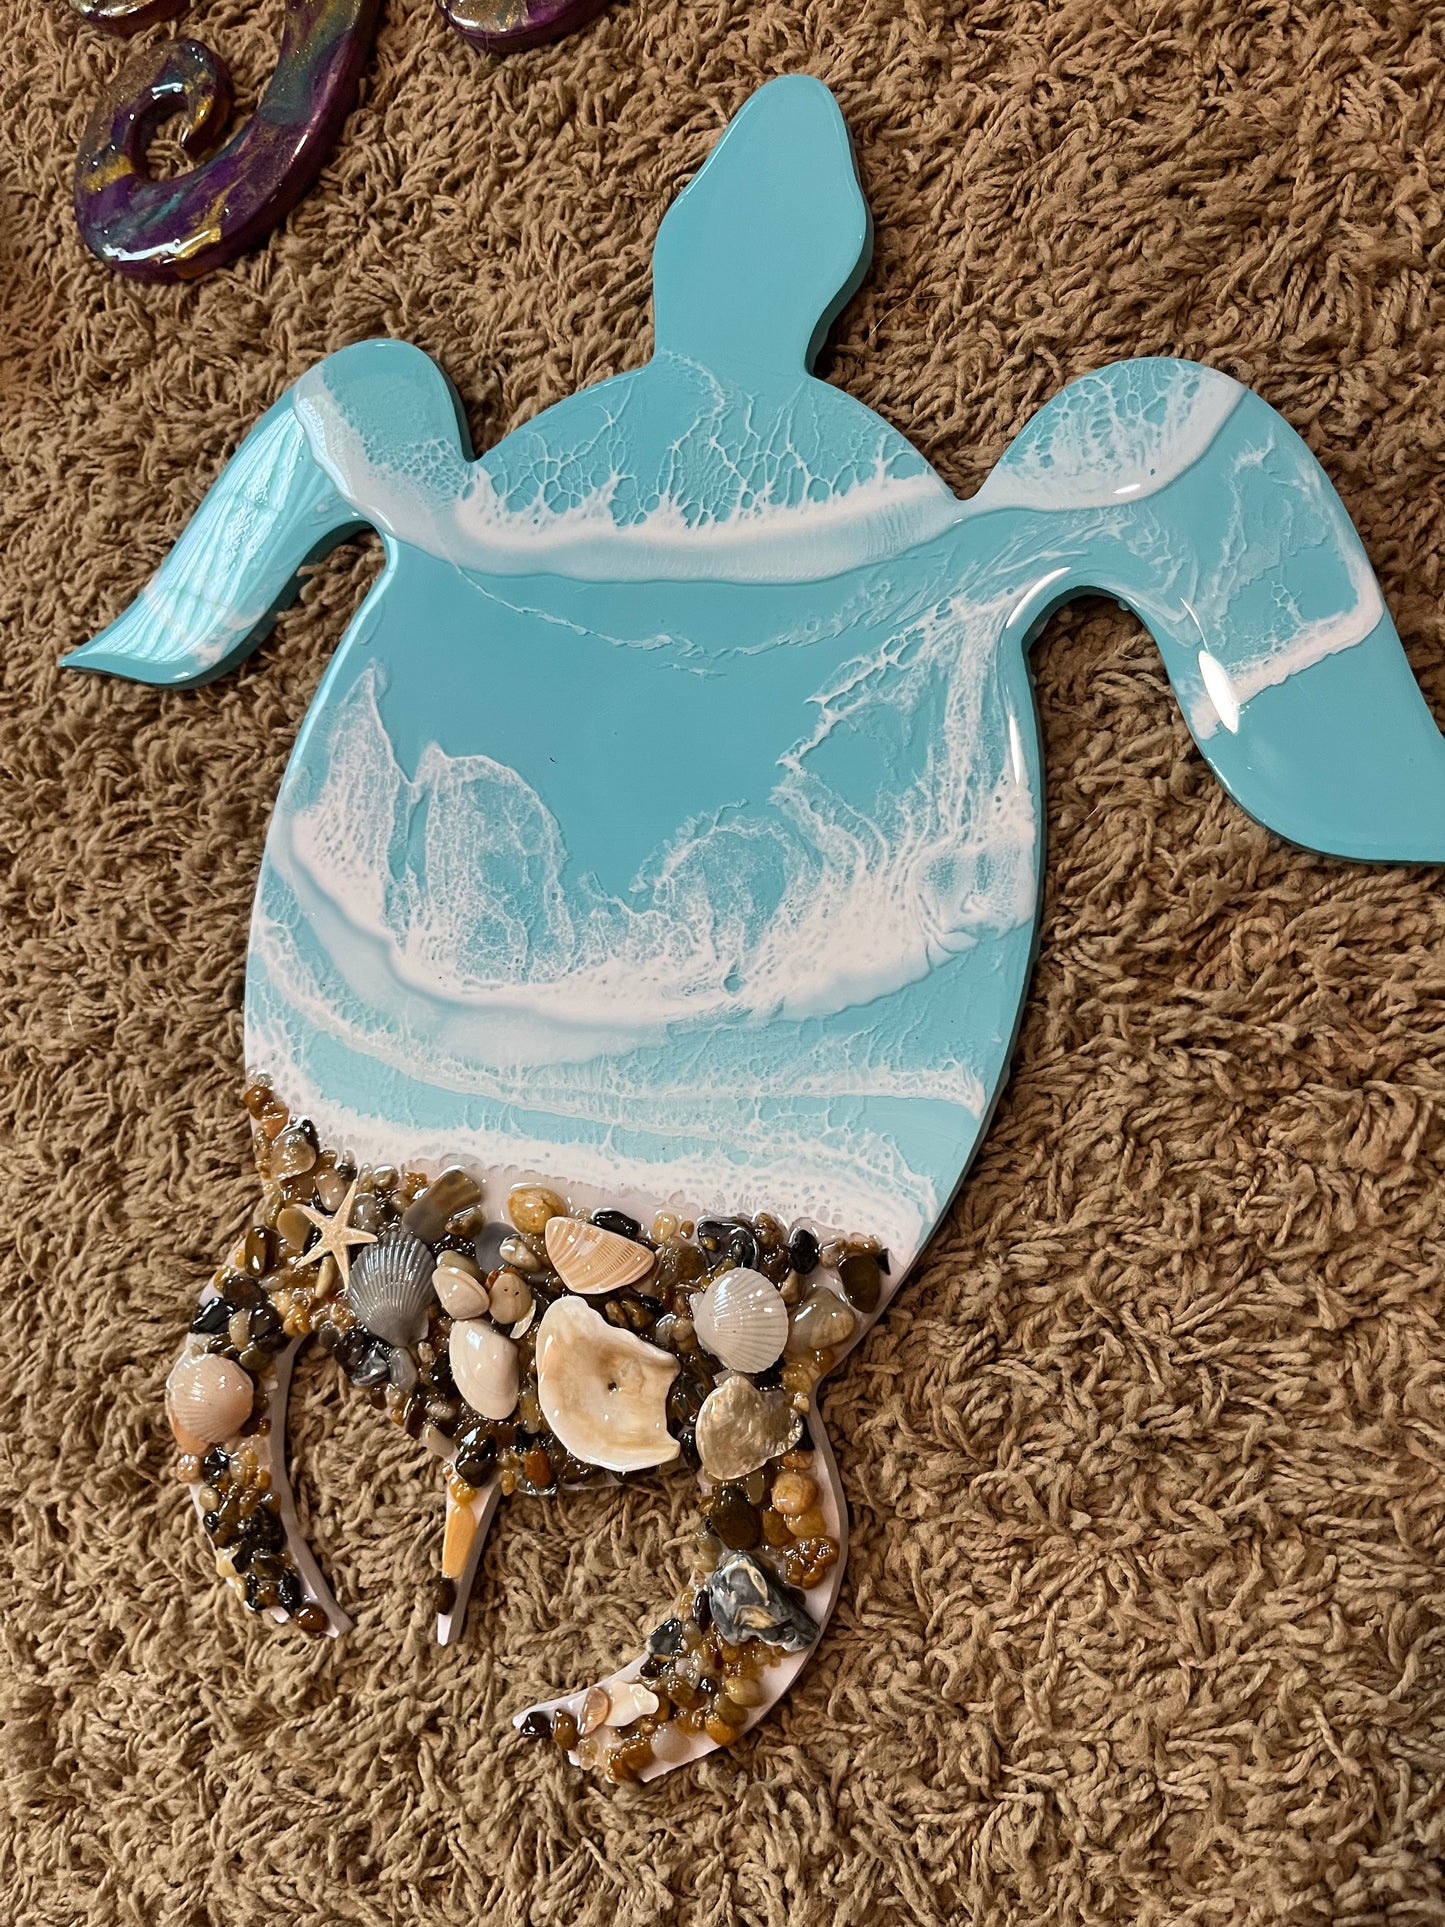 Light Blue Resin Waves Sea Turtle Wall Art with Real Outer Banks Shells on PVC sea turtle cut out. Real Outer Banks Shells. Size is 16" x 16" Take your love for the ocean to new, stylish depths with this unique Light Blue Resin Waves Sea Turtle Wall Art. Featuring real Outer Banks shells on a PVC sea turtle cut out, this piece adds a touch of quirky charm to any space. Measuring at 16" x 16", it's the perfect size to make a statement and bring a splash of the sea to your home.